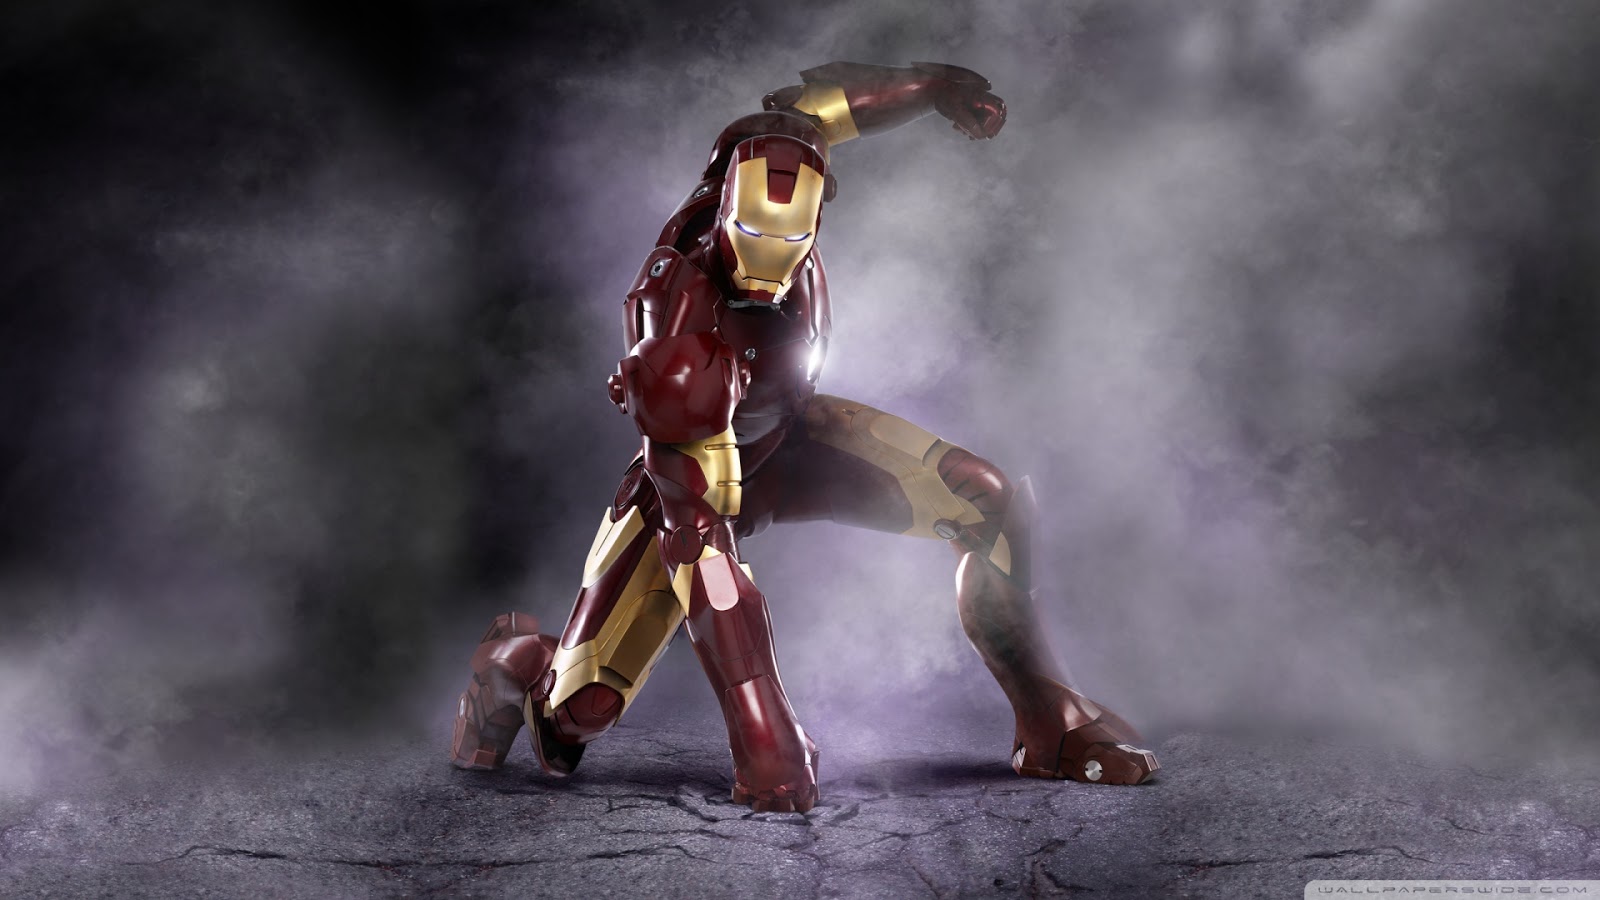 Top 10 Best Hd Iron Man 3 Wallpapers Tracking The Tech